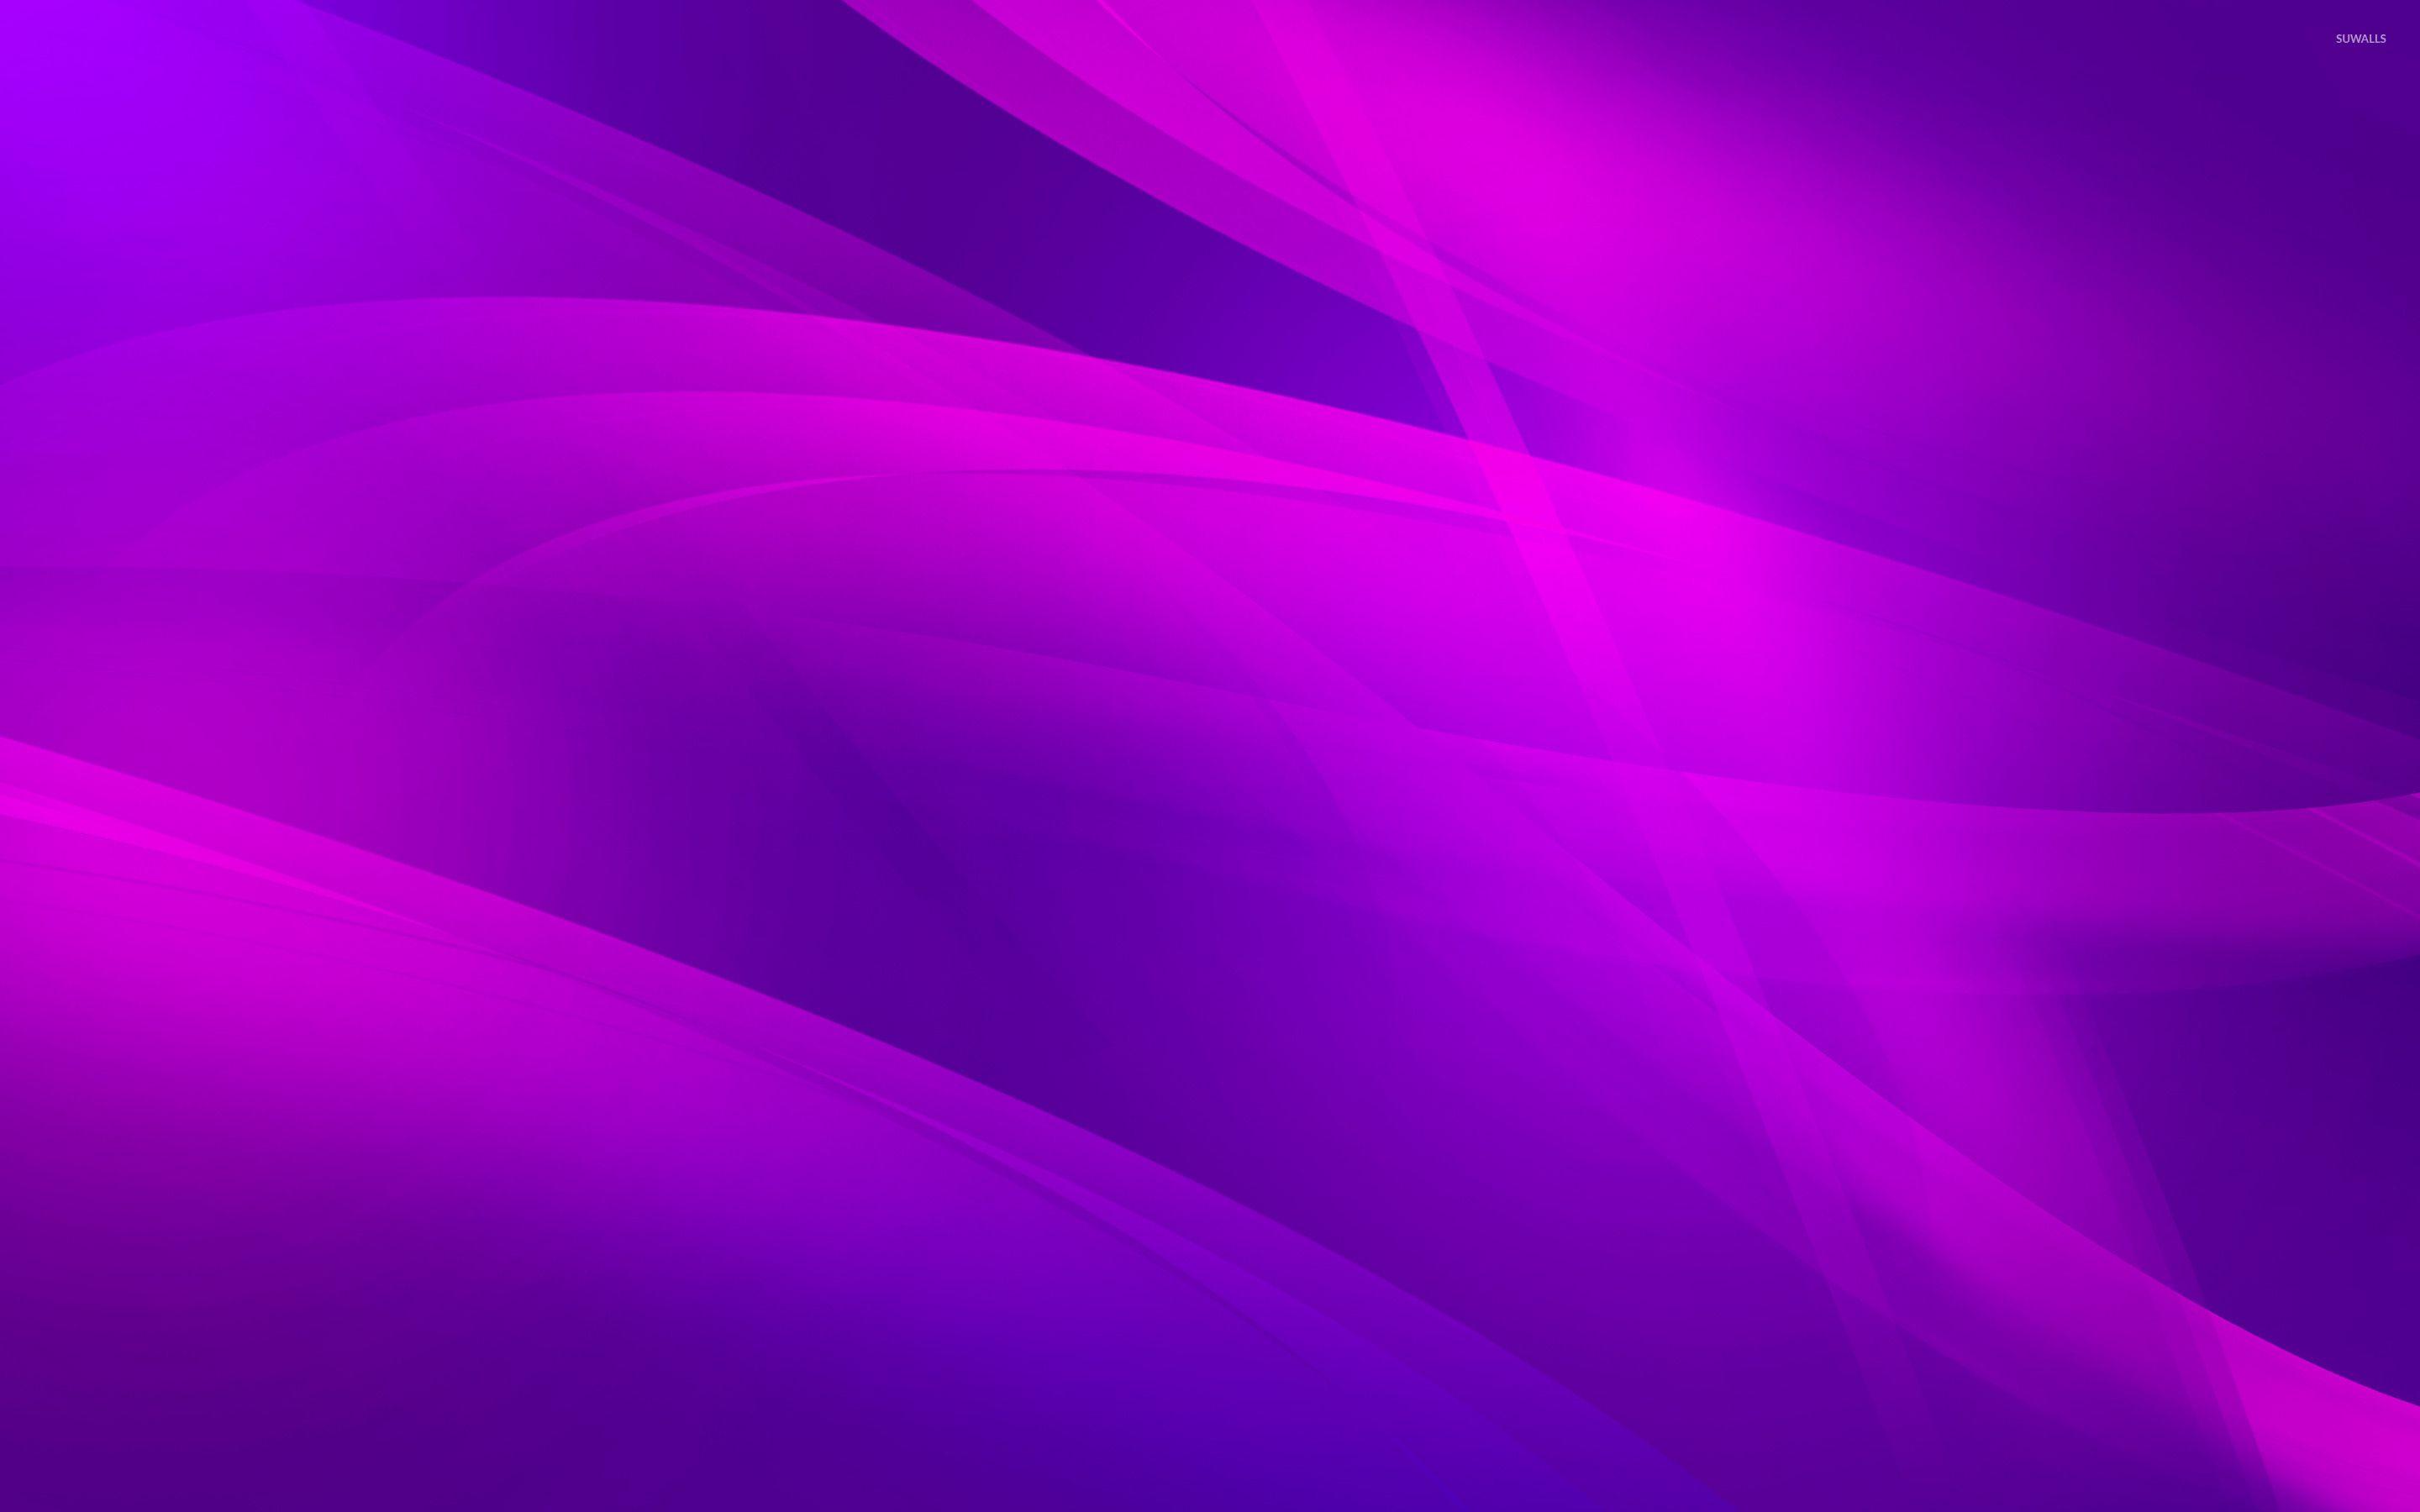 Abstract 4k background HD image pink curves on purple 24510